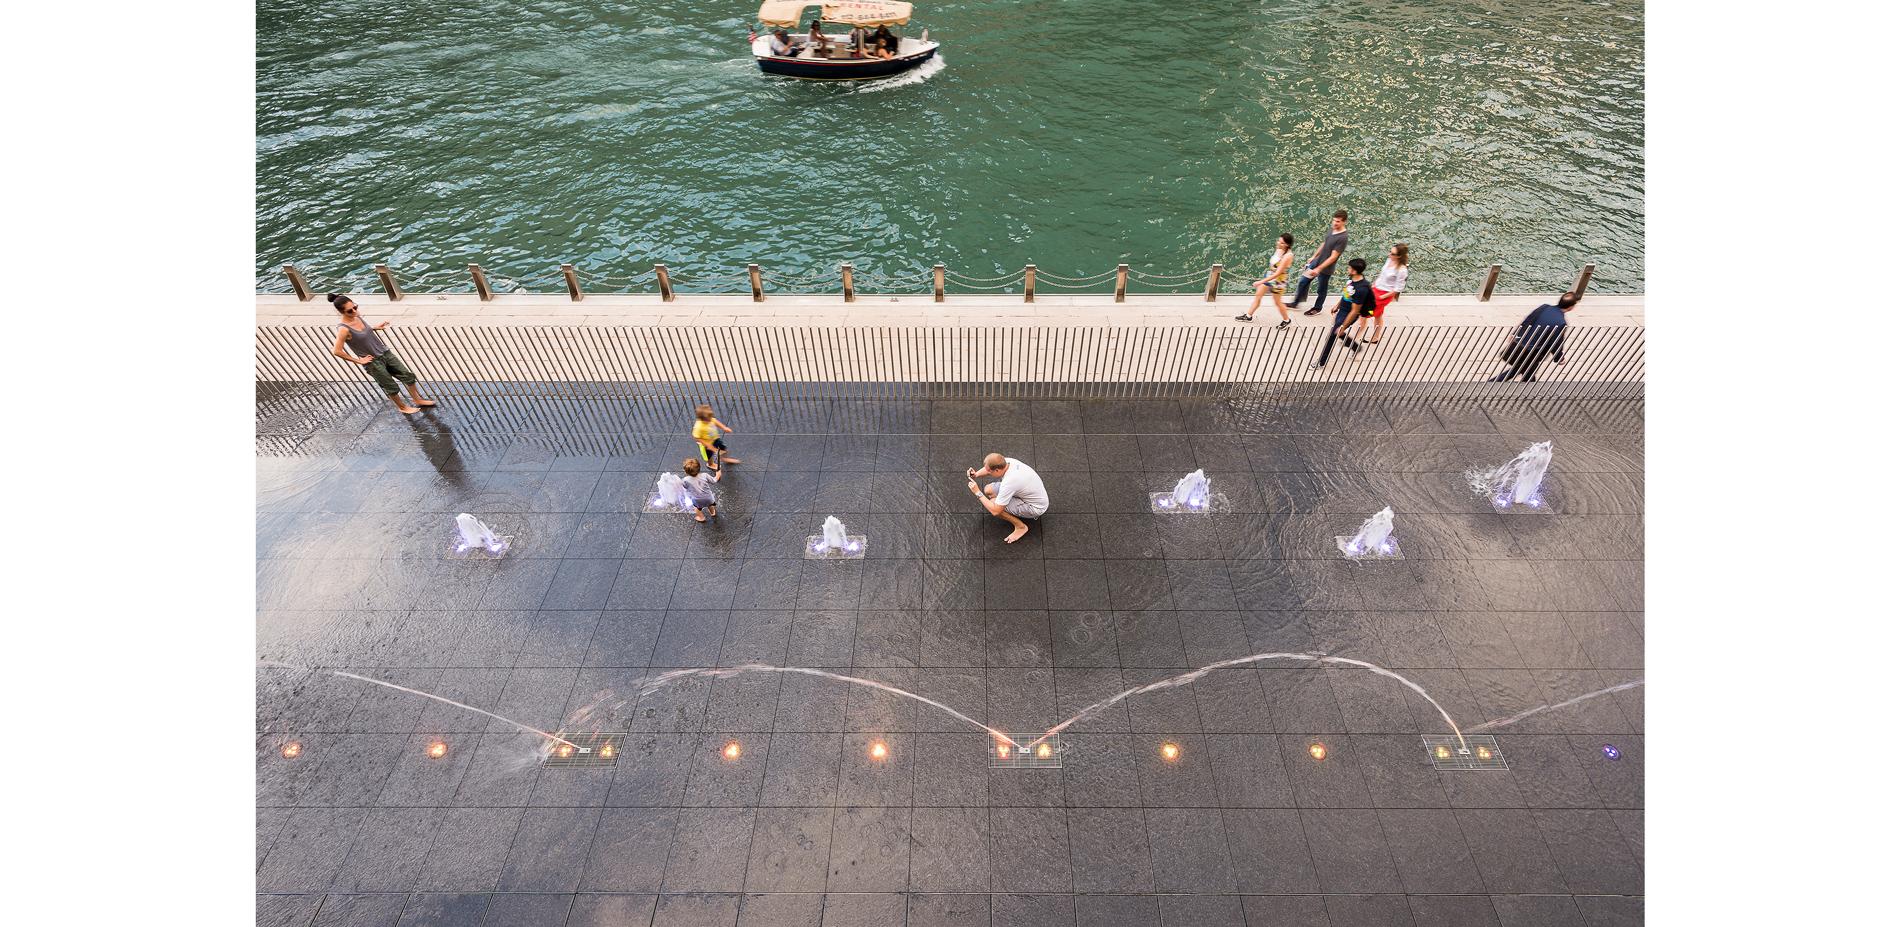 The Water Plaza provides an interactive water feature for engagement with water at the river’s edge. The fountain’s effects can be minimized to enable…